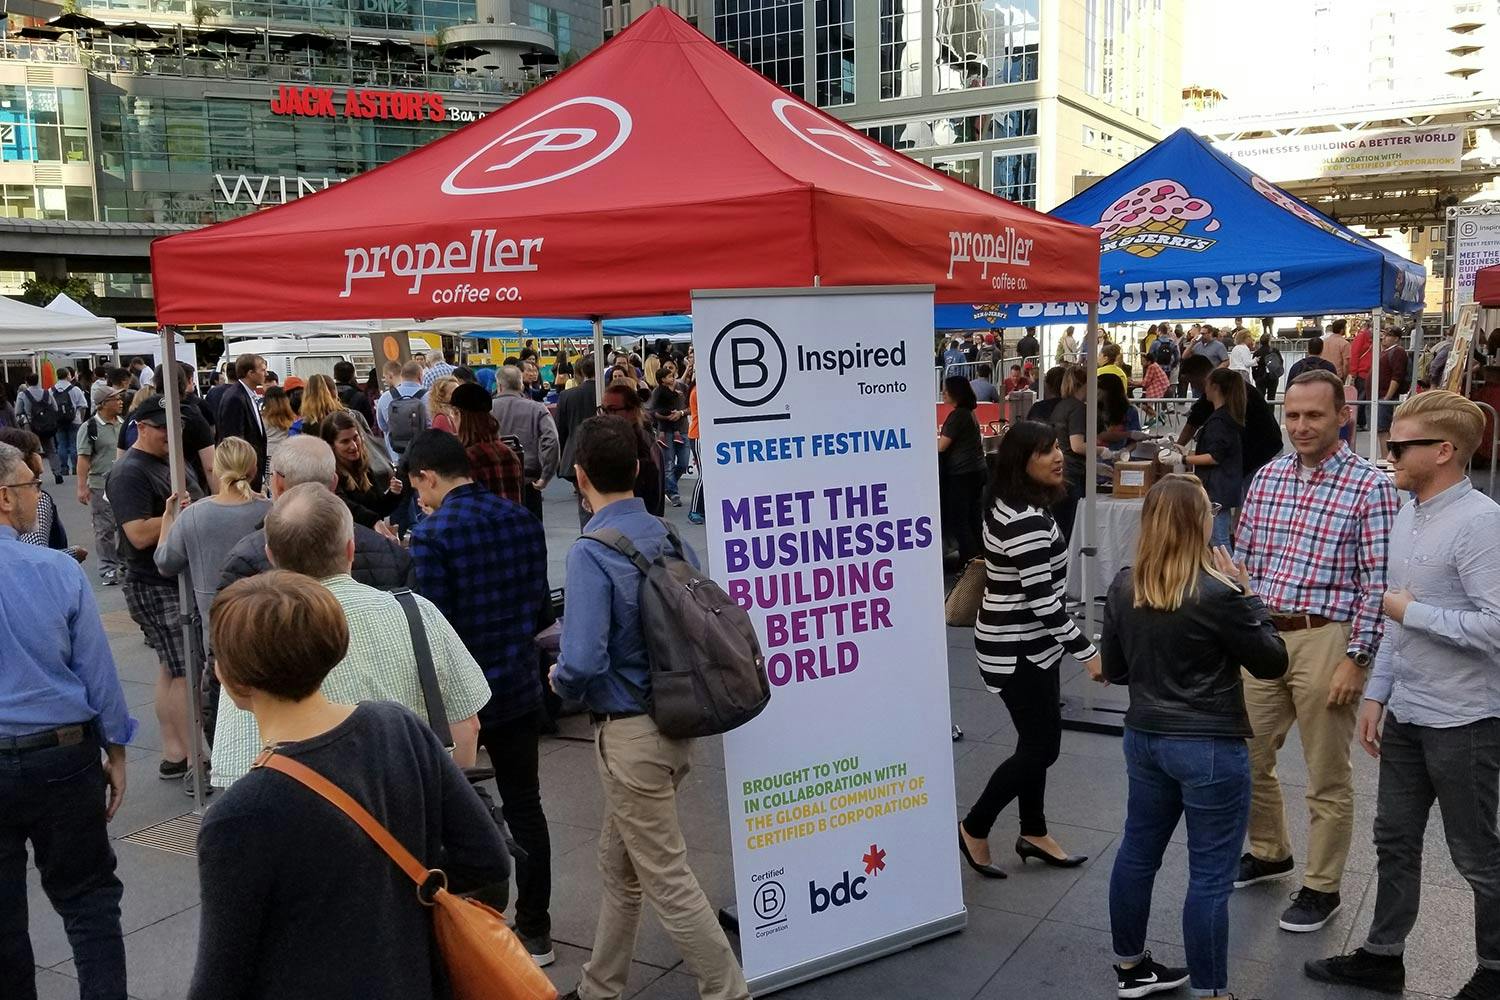 Canopy tents of various brands in a crowded plaza. A pull-up banner reads “Meet the businesses building a better world.”